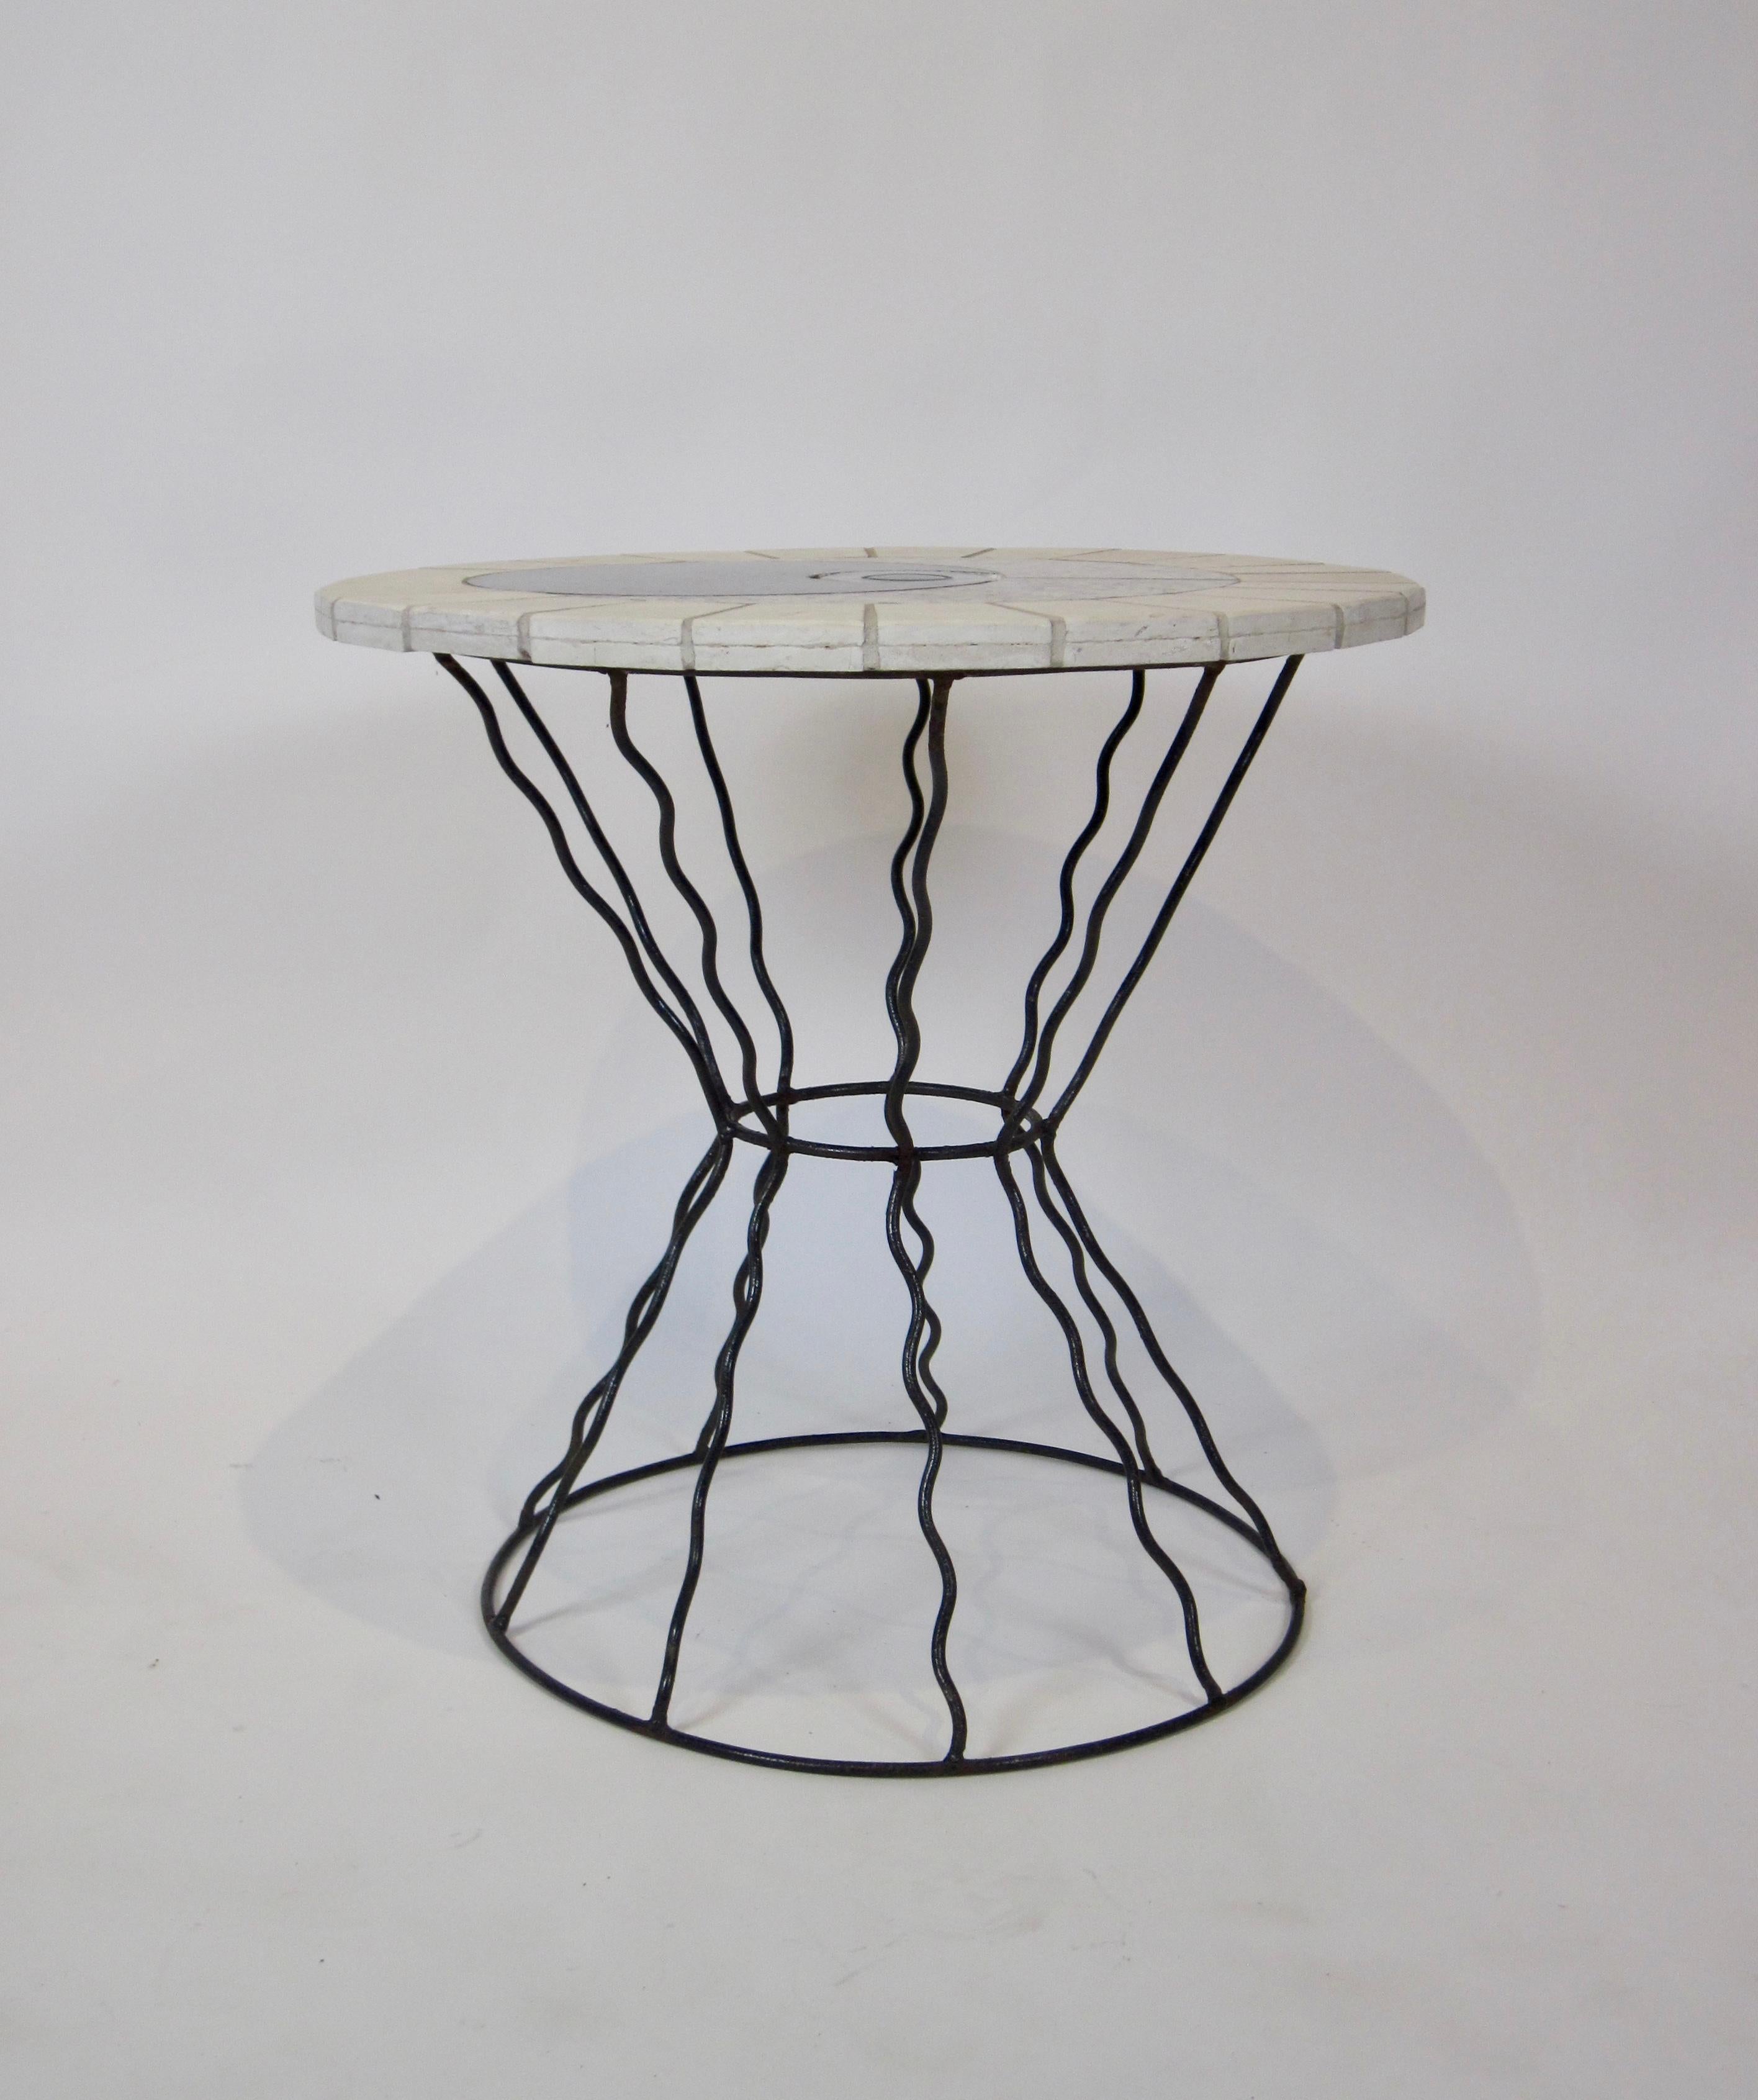 20th Century Memphis Era Stone & Glass Table on Wrought Iron Base with Third Eye Design For Sale